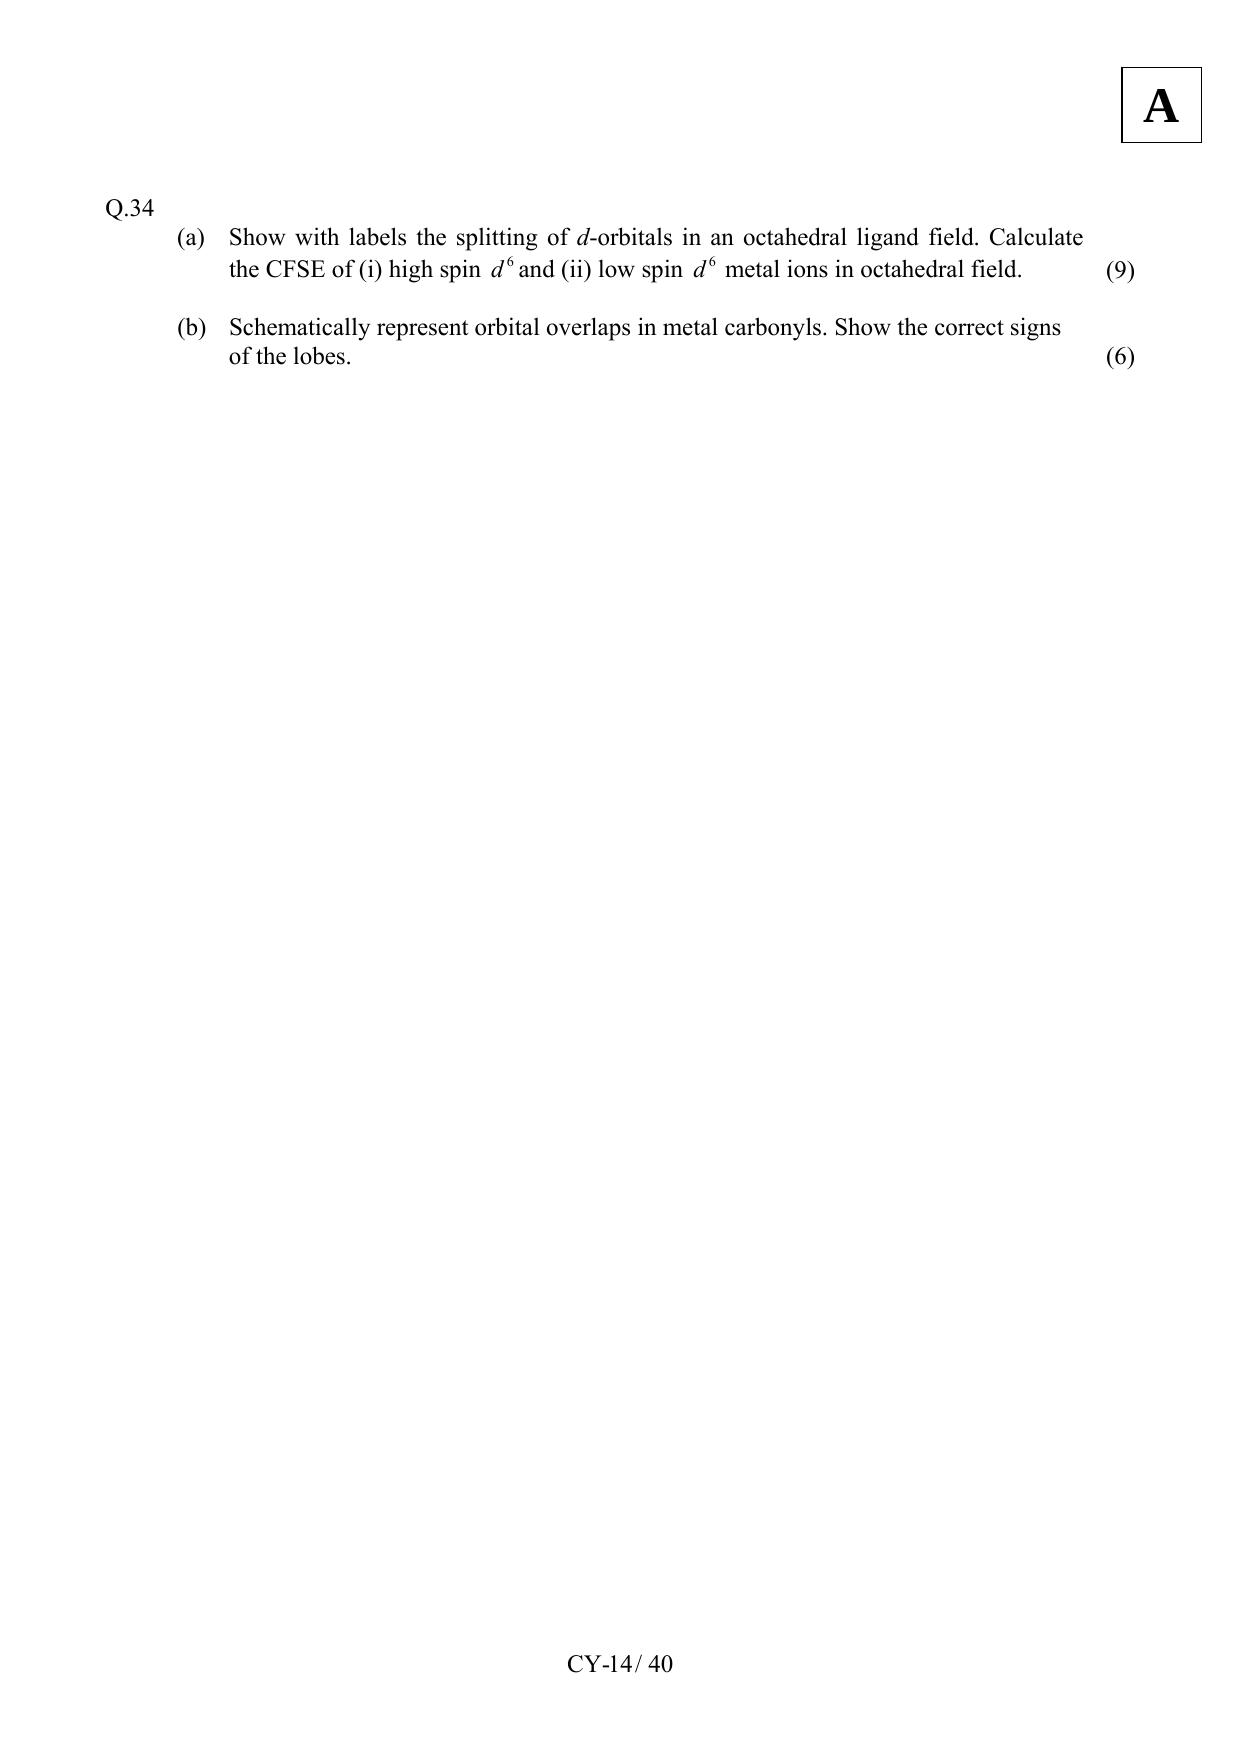 JAM 2012: CY Question Paper - Page 16